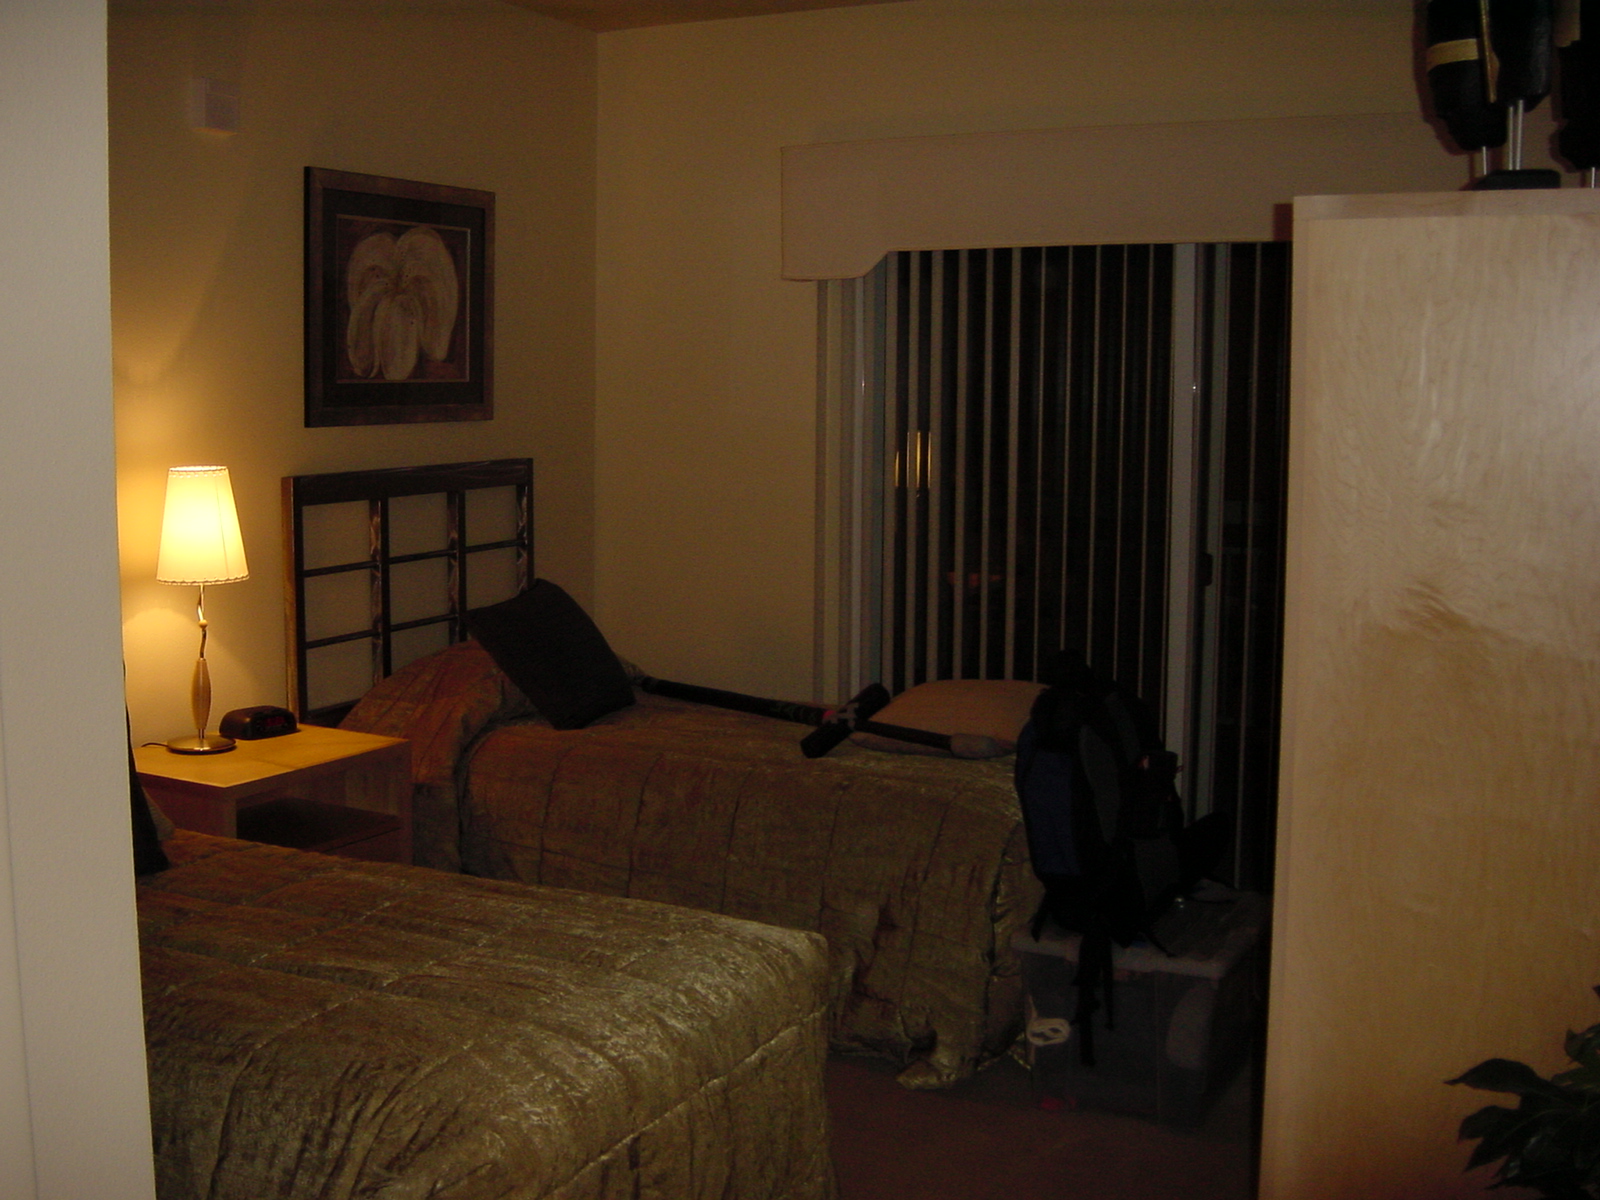 The bedroom that Graham and I had.